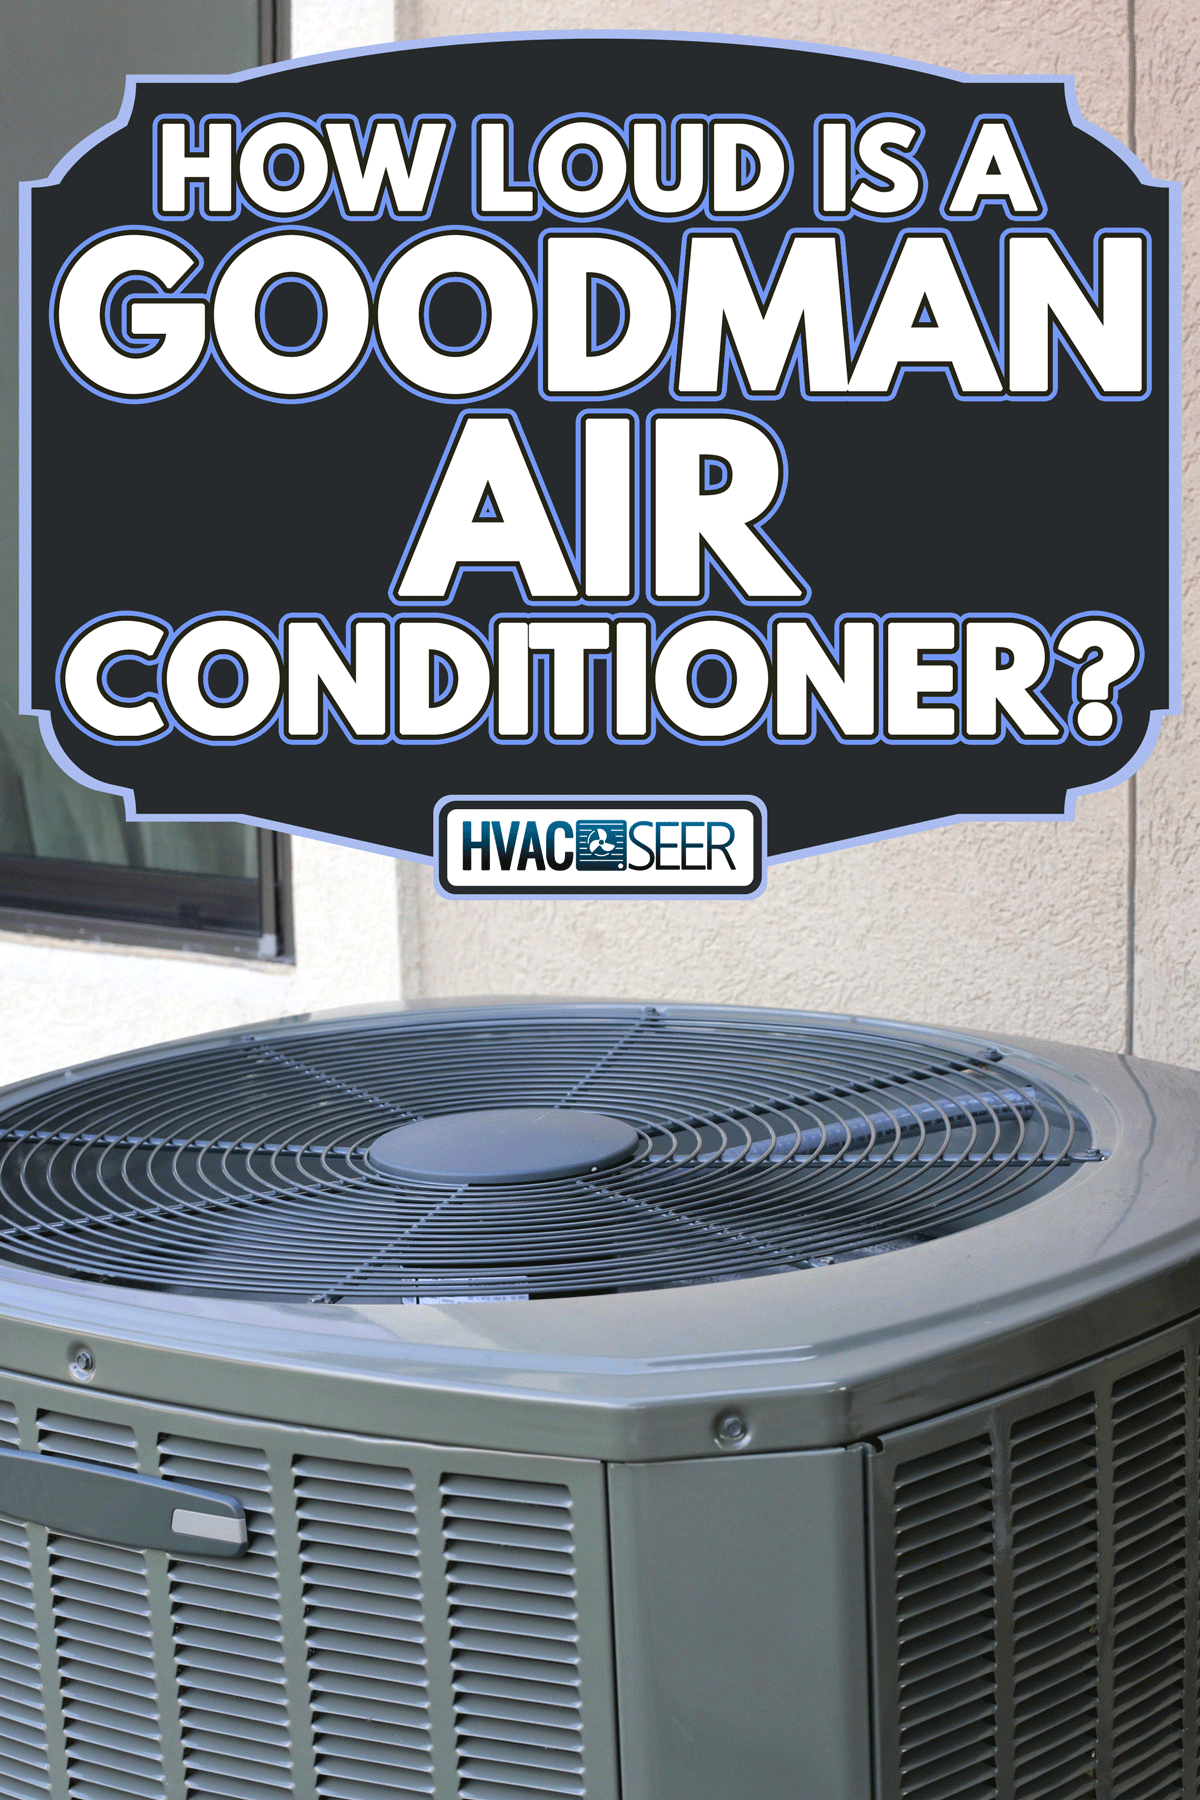 High efficiency modern air conditioner, How Loud Is A Goodman Air Conditioner?